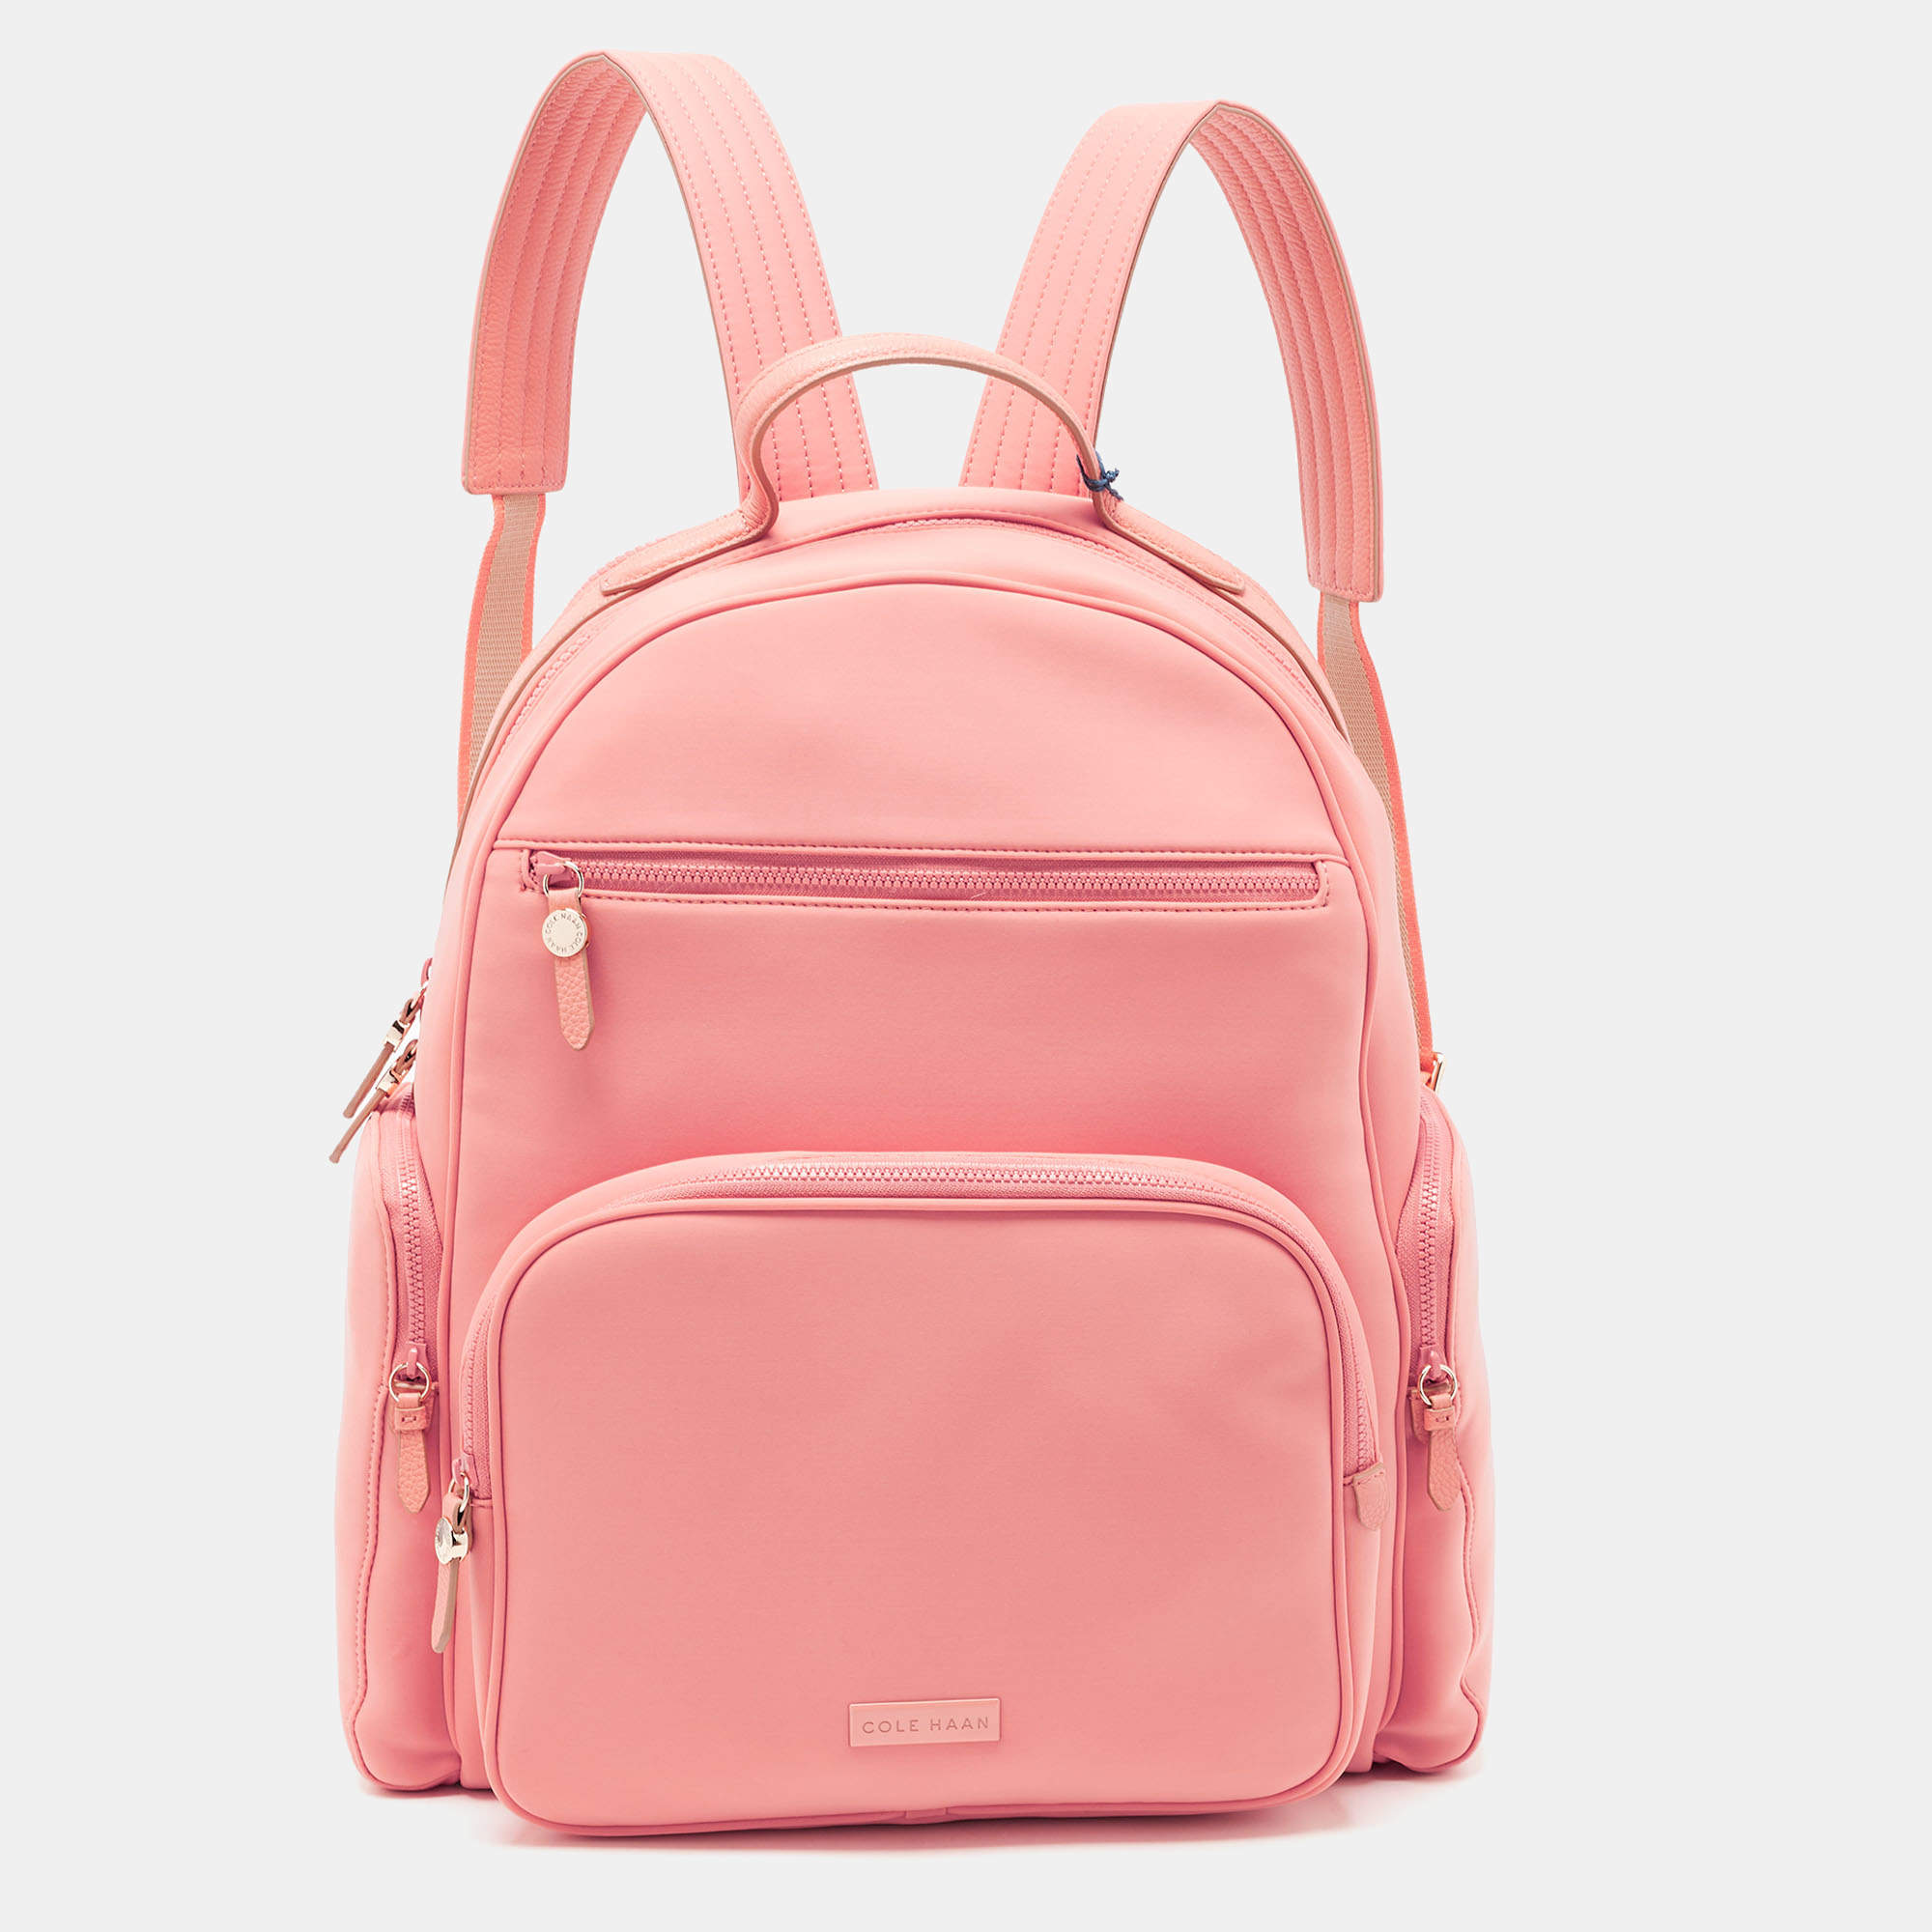 Cole Haan Pink Neoprene Grand Ambition Travel Backpack